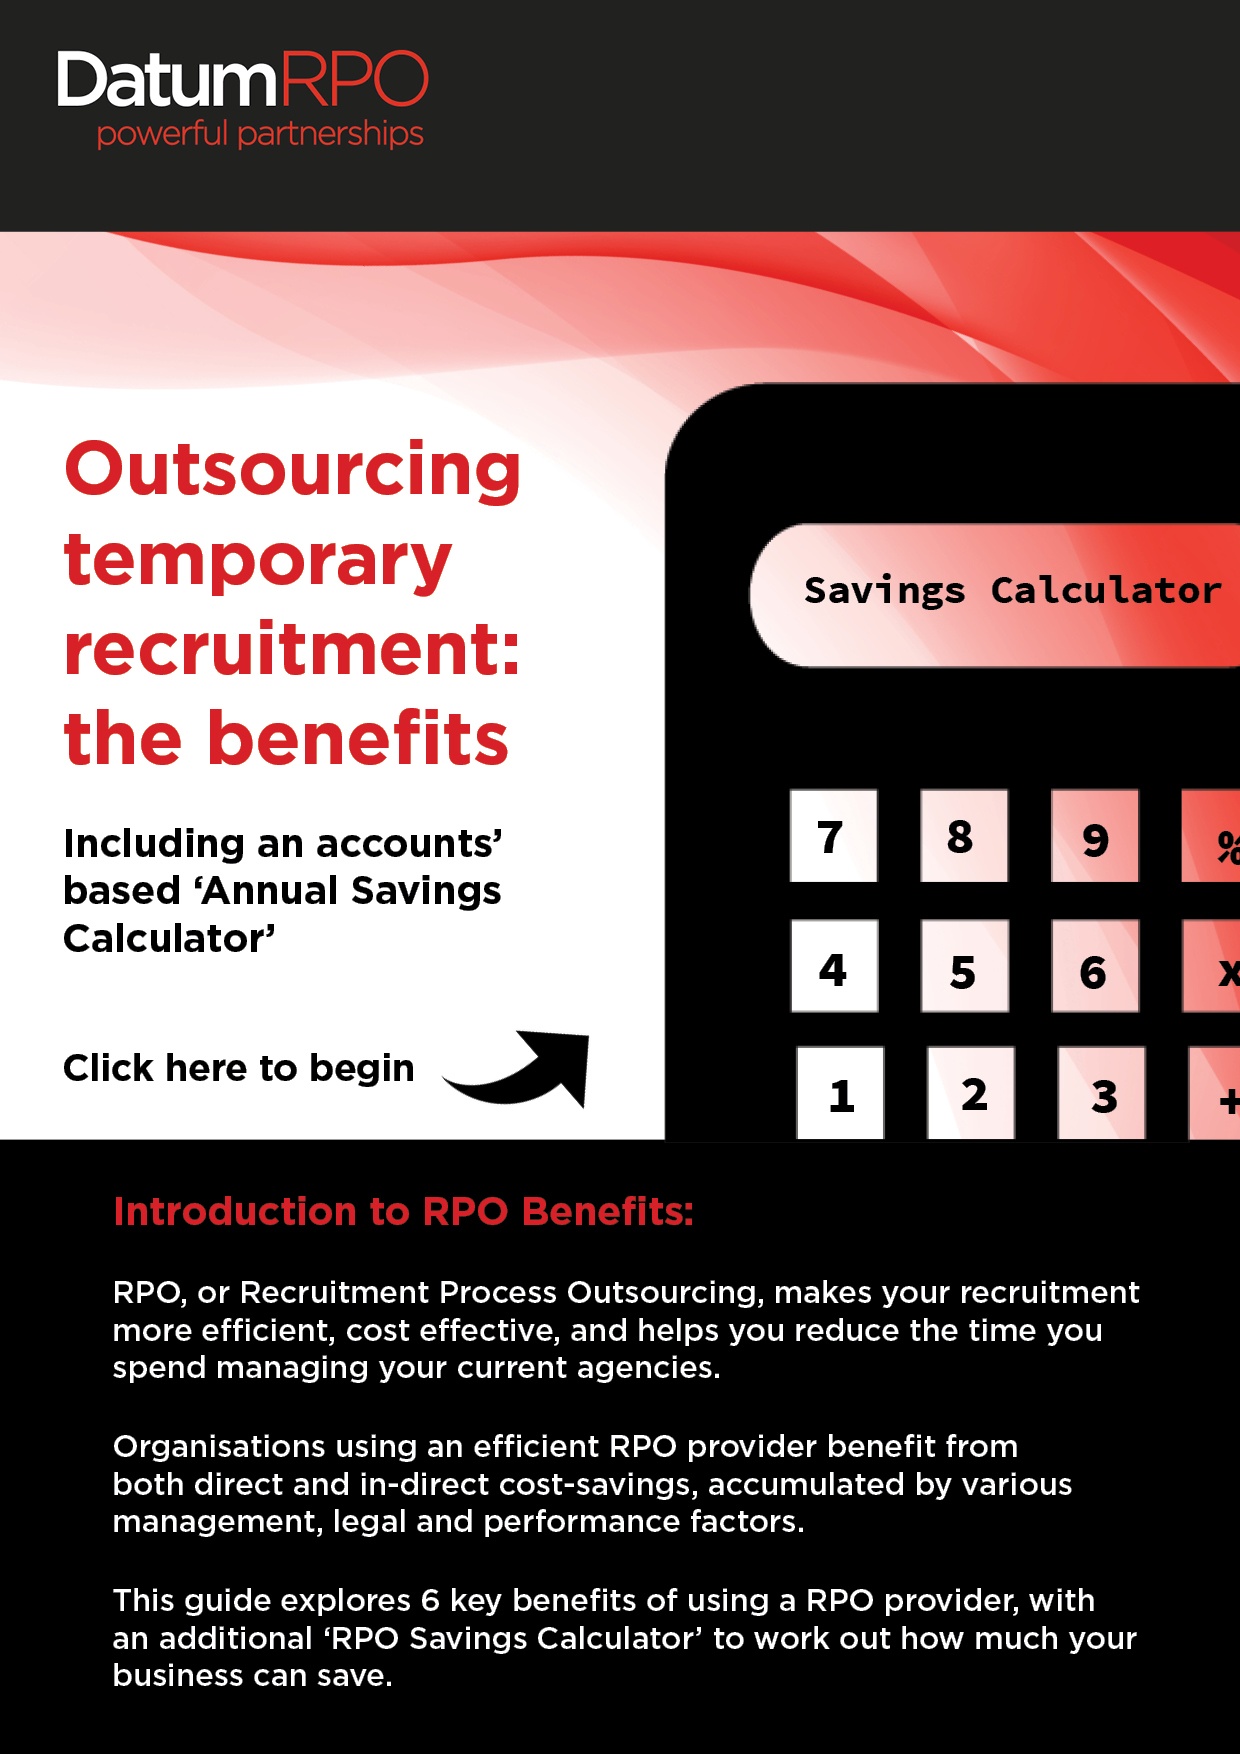 Your guide to recruitment process outsourcing and savings calculator